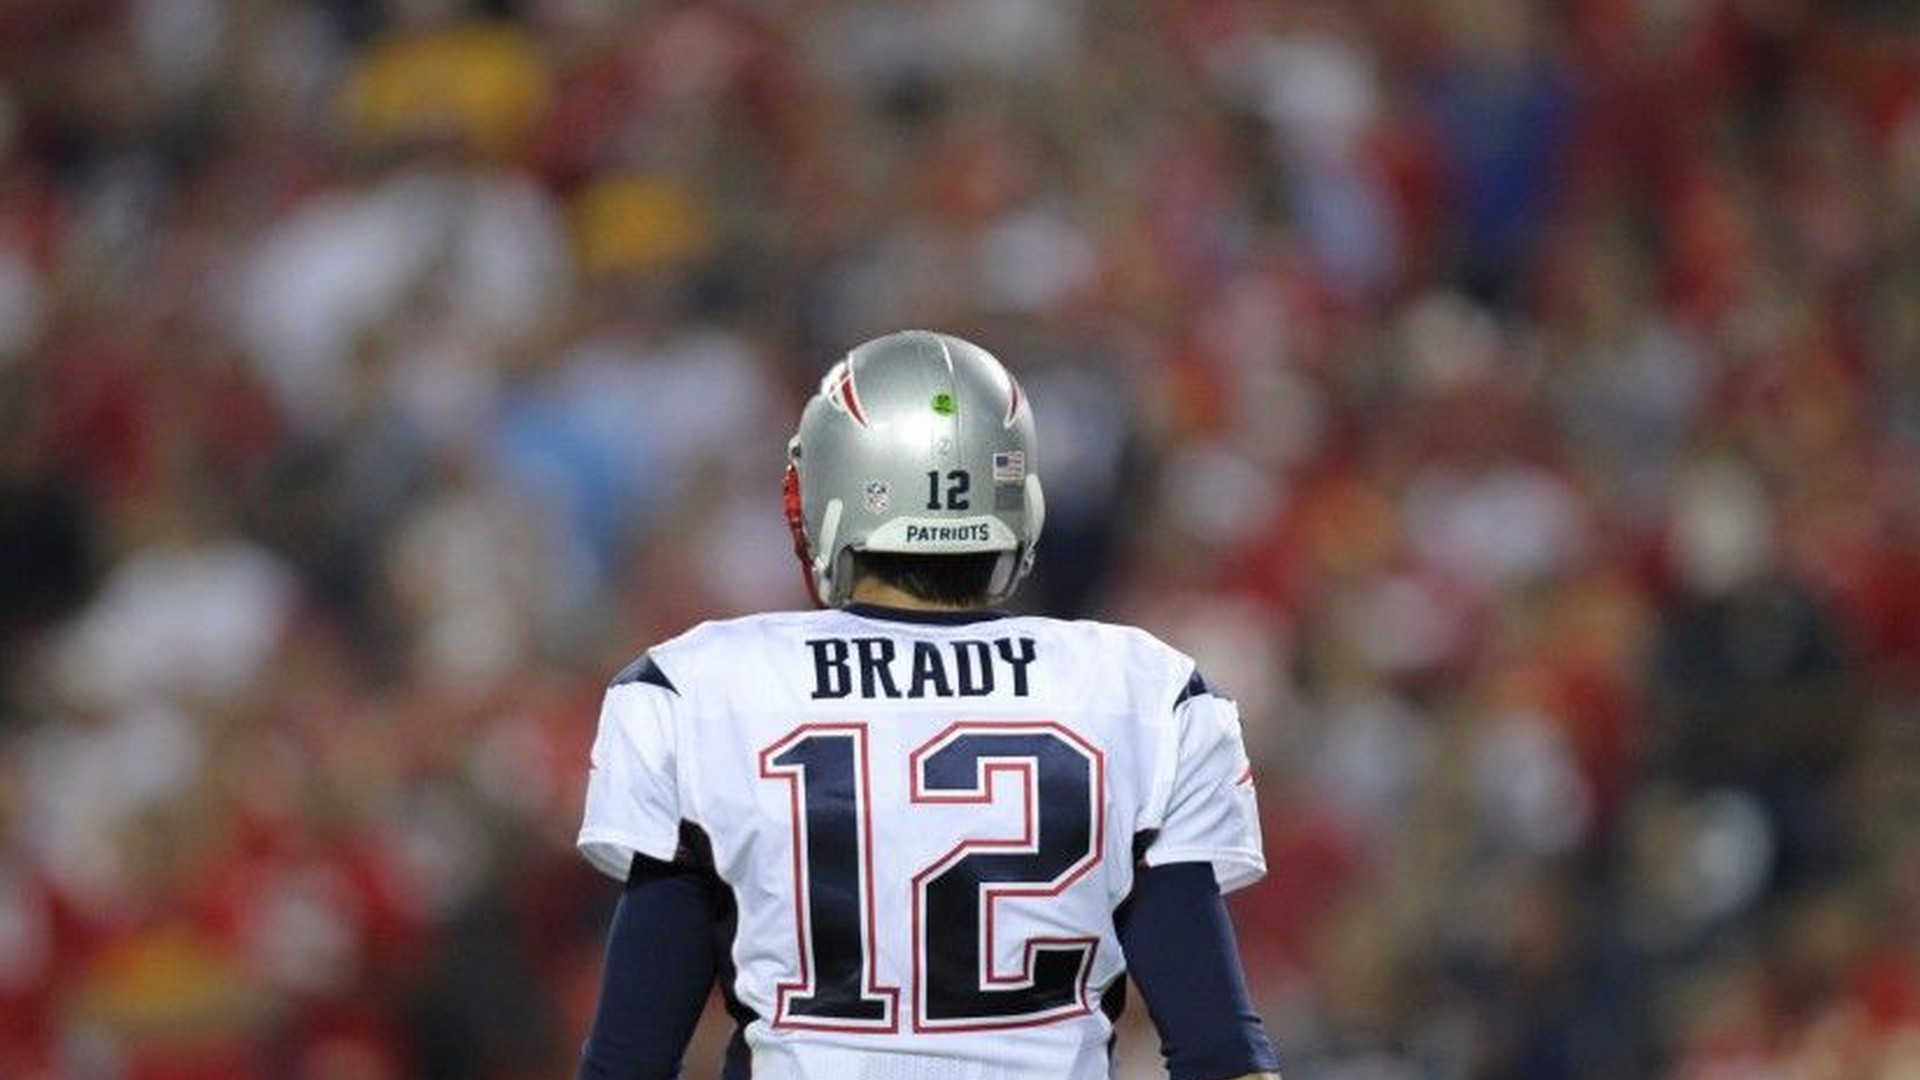 Wallpapers Computer Tom Brady Patriots with image resolution 1920x1080 pixel. You can make this wallpaper for your Desktop Computer Backgrounds, Mac Wallpapers, Android Lock screen or iPhone Screensavers